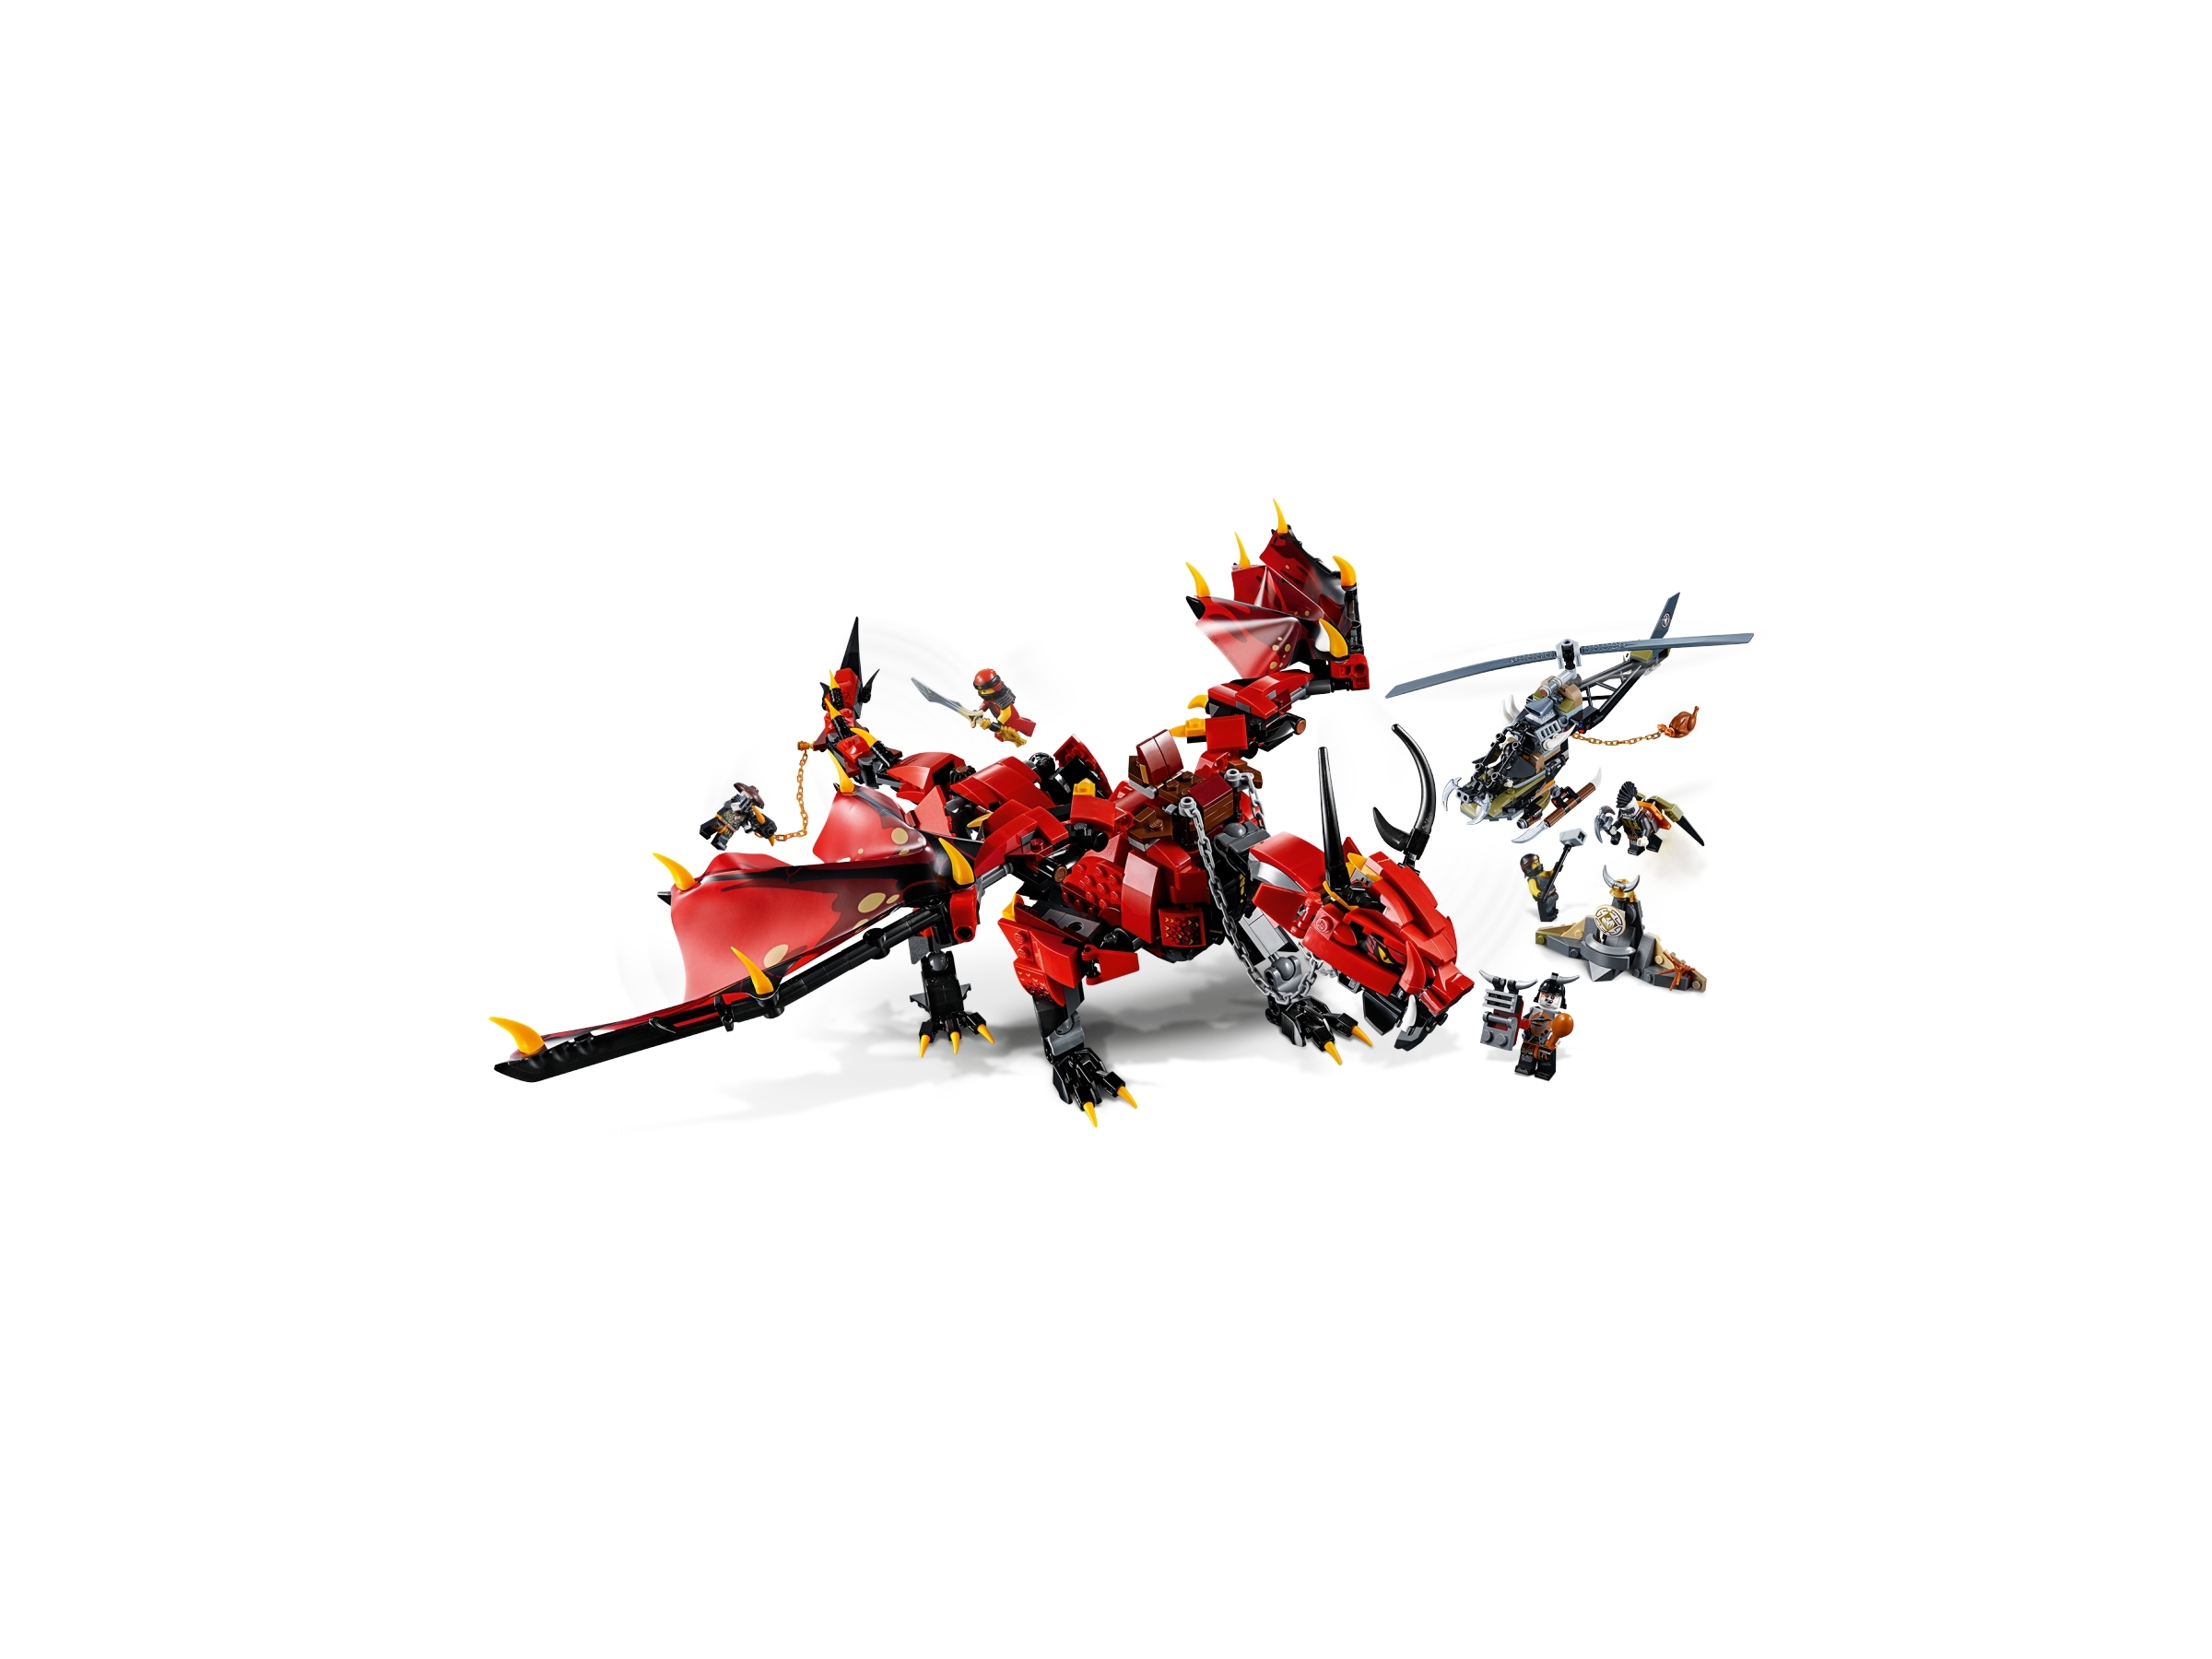 Firstbourne NINJAGO® | Buy online at the Official LEGO® US